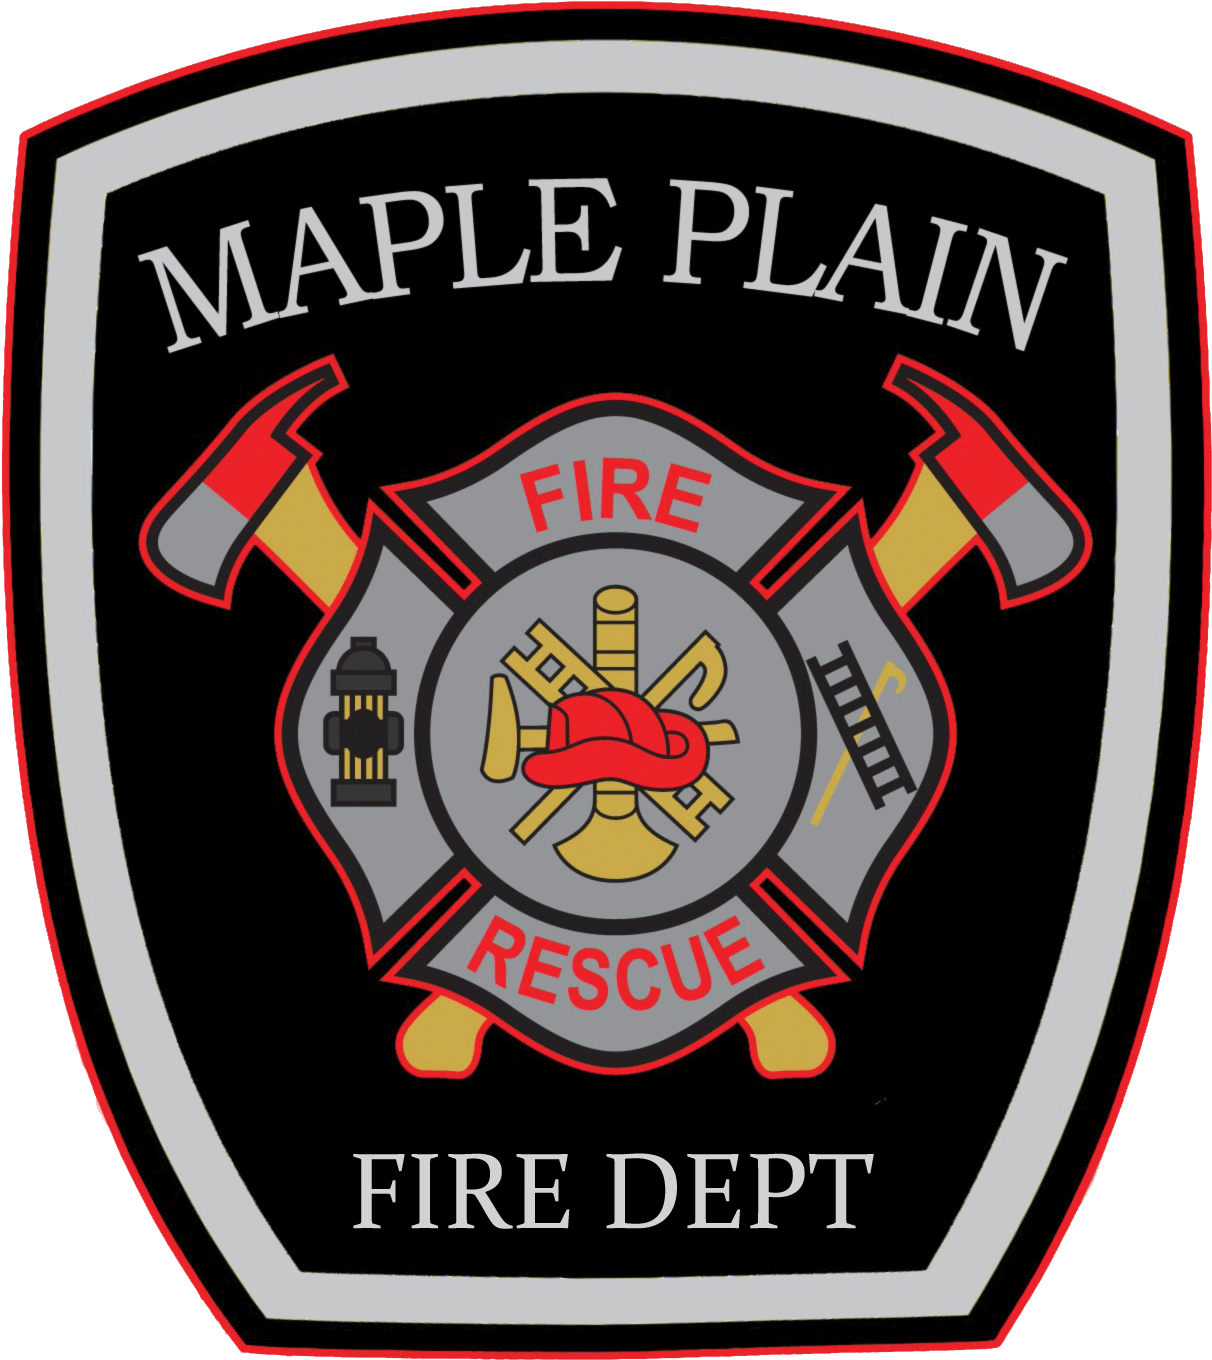 Maple Plain Fire Department Responds To Business Fire - Firefighter Badge Transparent Background (1326x1522)